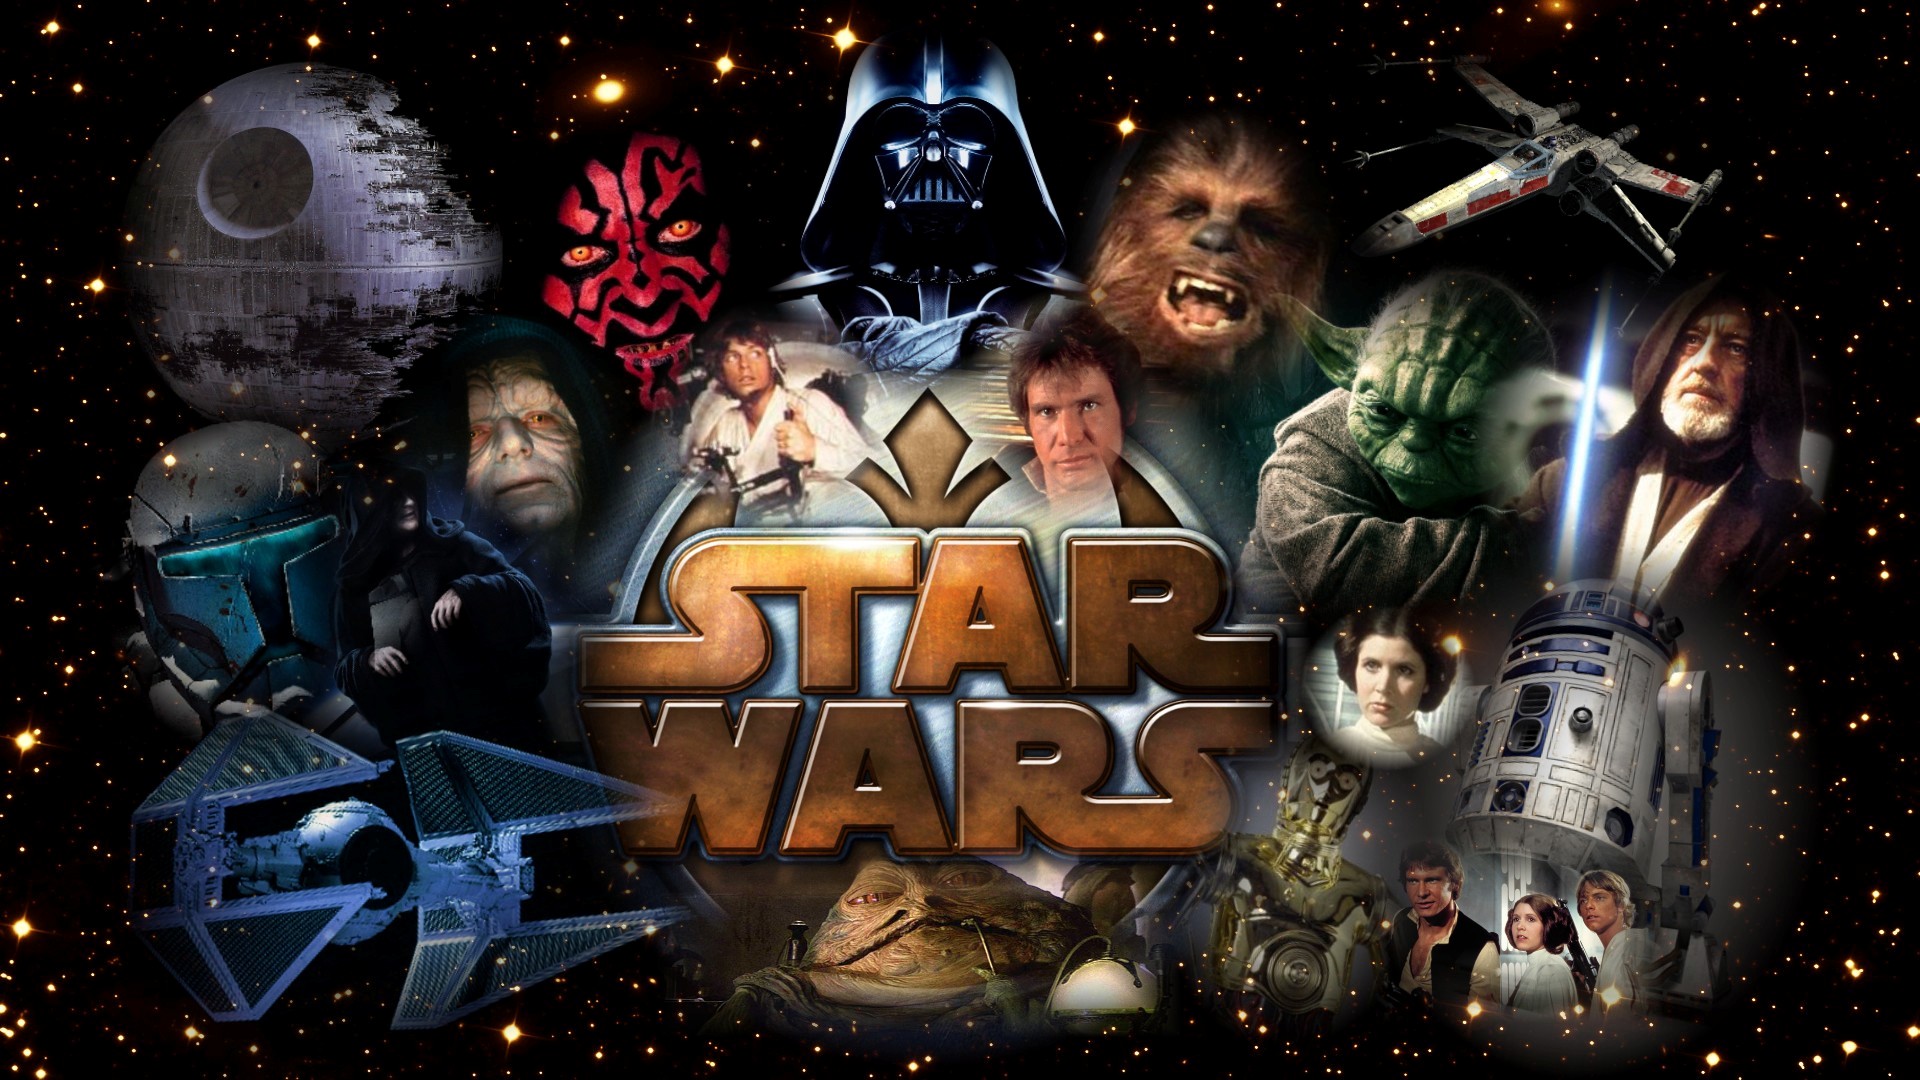 STAR WARS BACKGROUNDS WERQ112 Wallpaperf1